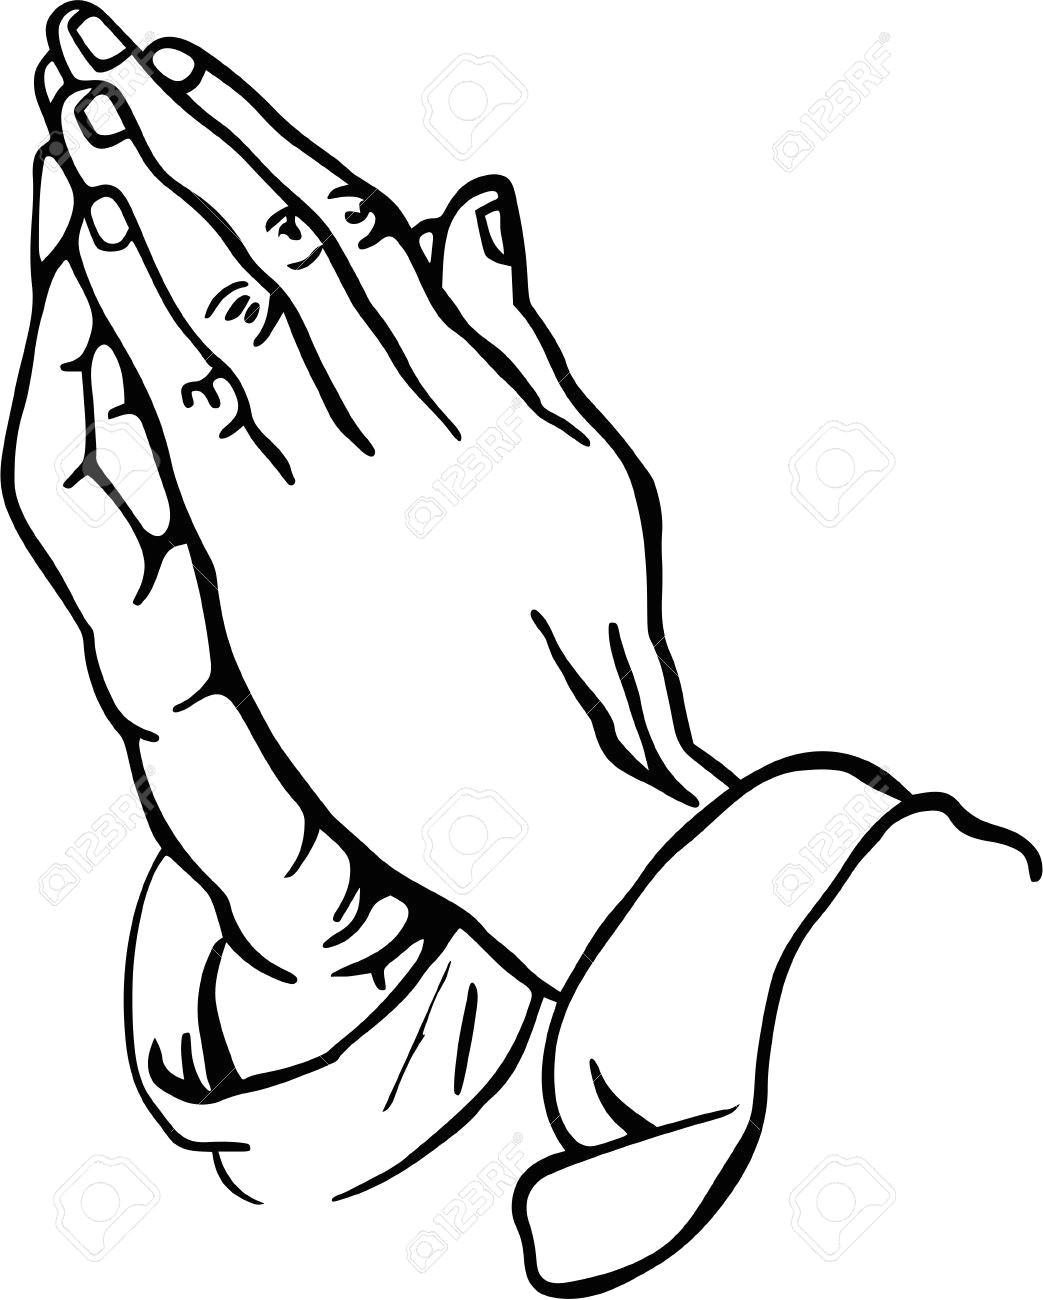 Drawing Hands Print Praying Hands Clipart Stock Photo Picture and Royalty Free Image